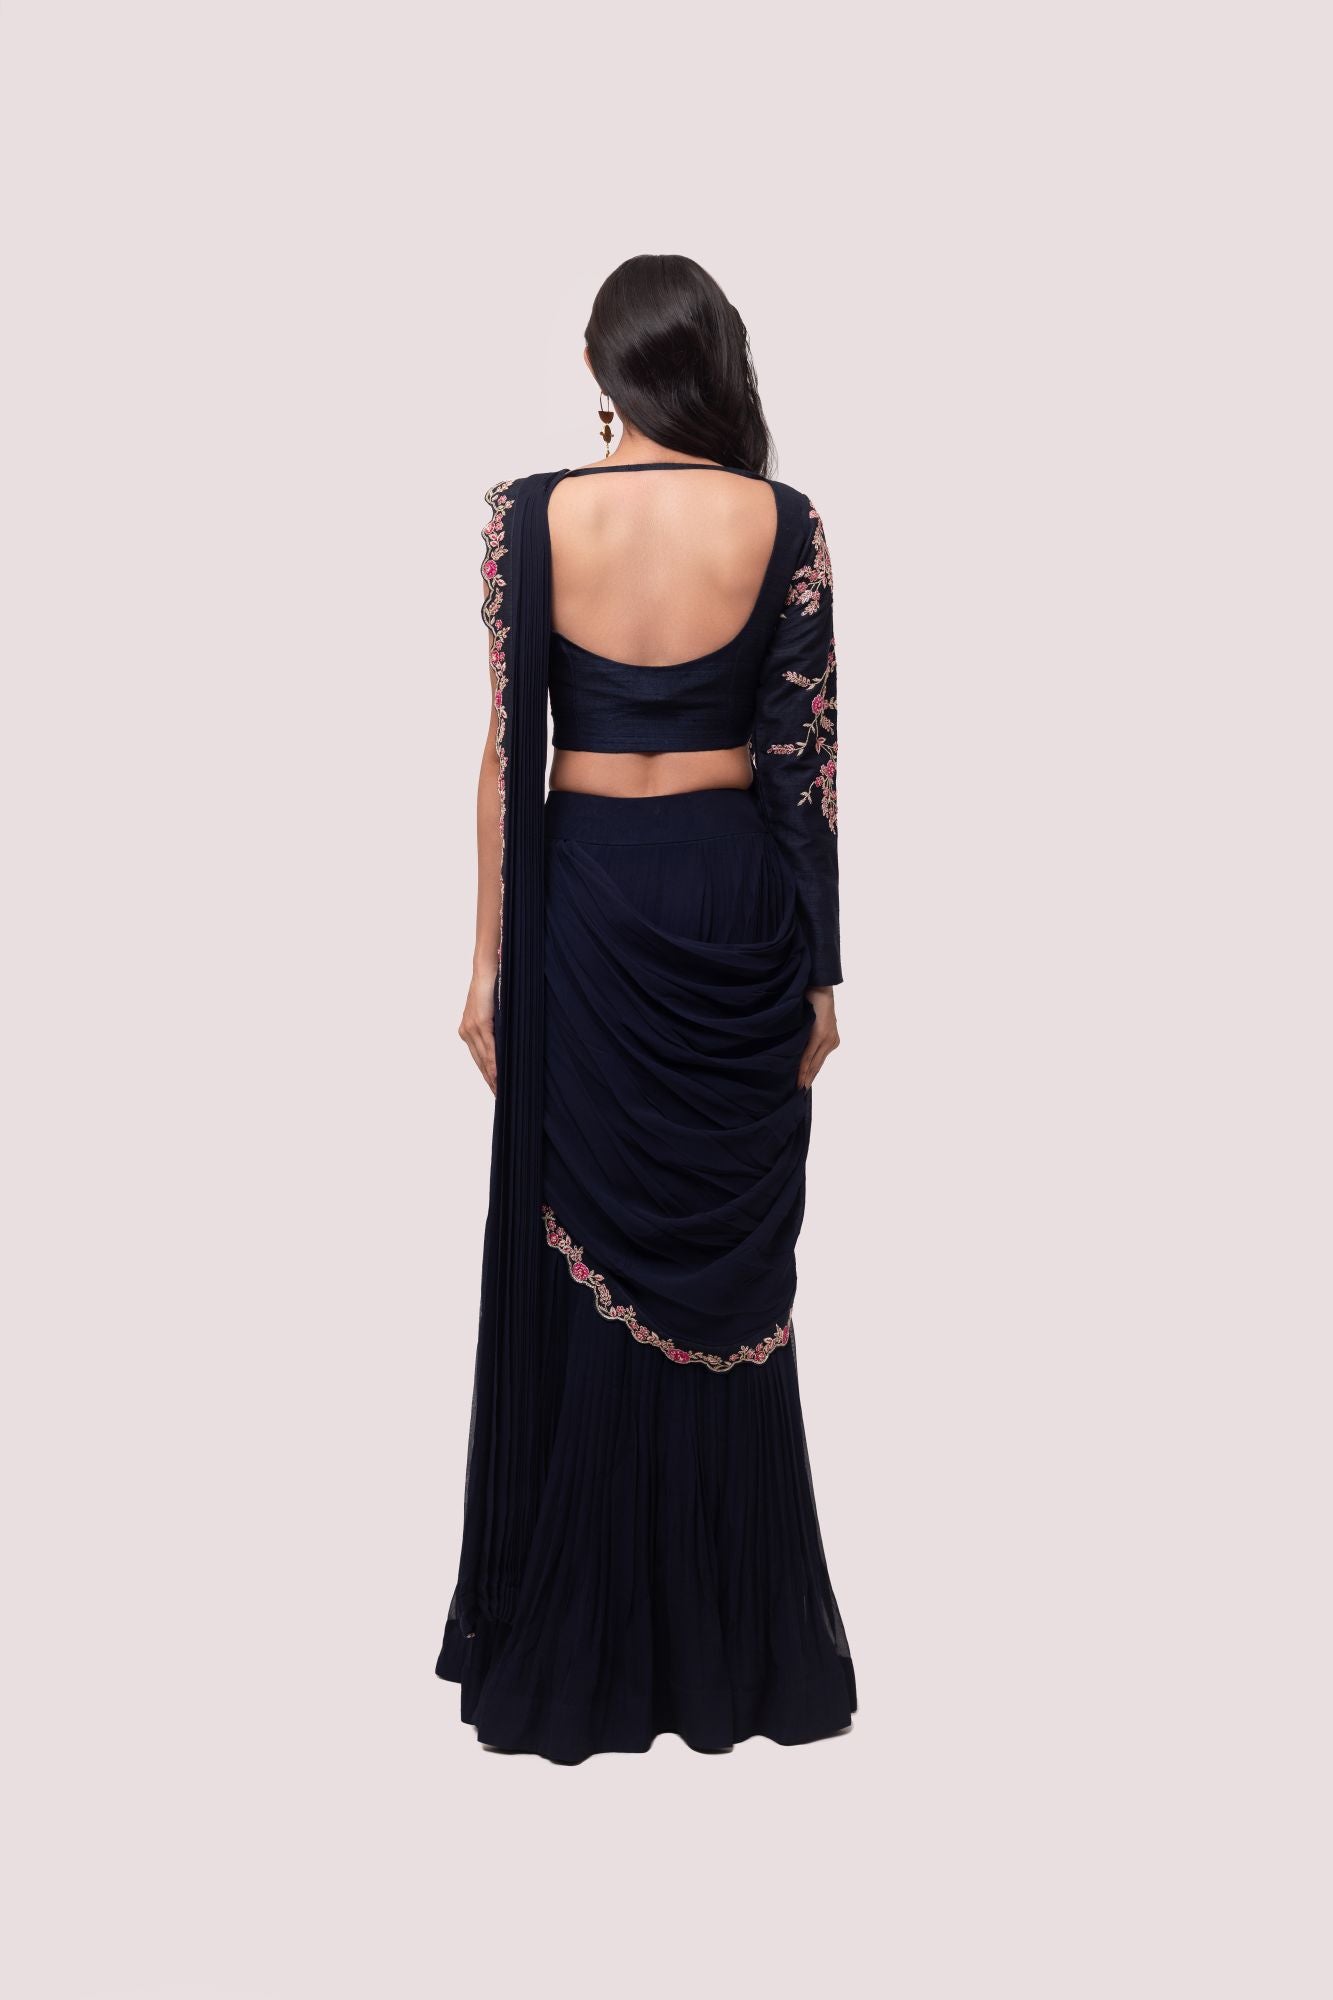 Shop navy blue saree with faux half jacket blouse. Make a fashion statement on festive occasions and weddings with designer sarees, designer suits, Indian dresses, Anarkali suits, palazzo suits, designer gowns, sharara suits, and embroidered sarees from Pure Elegance Indian fashion store in the USA.